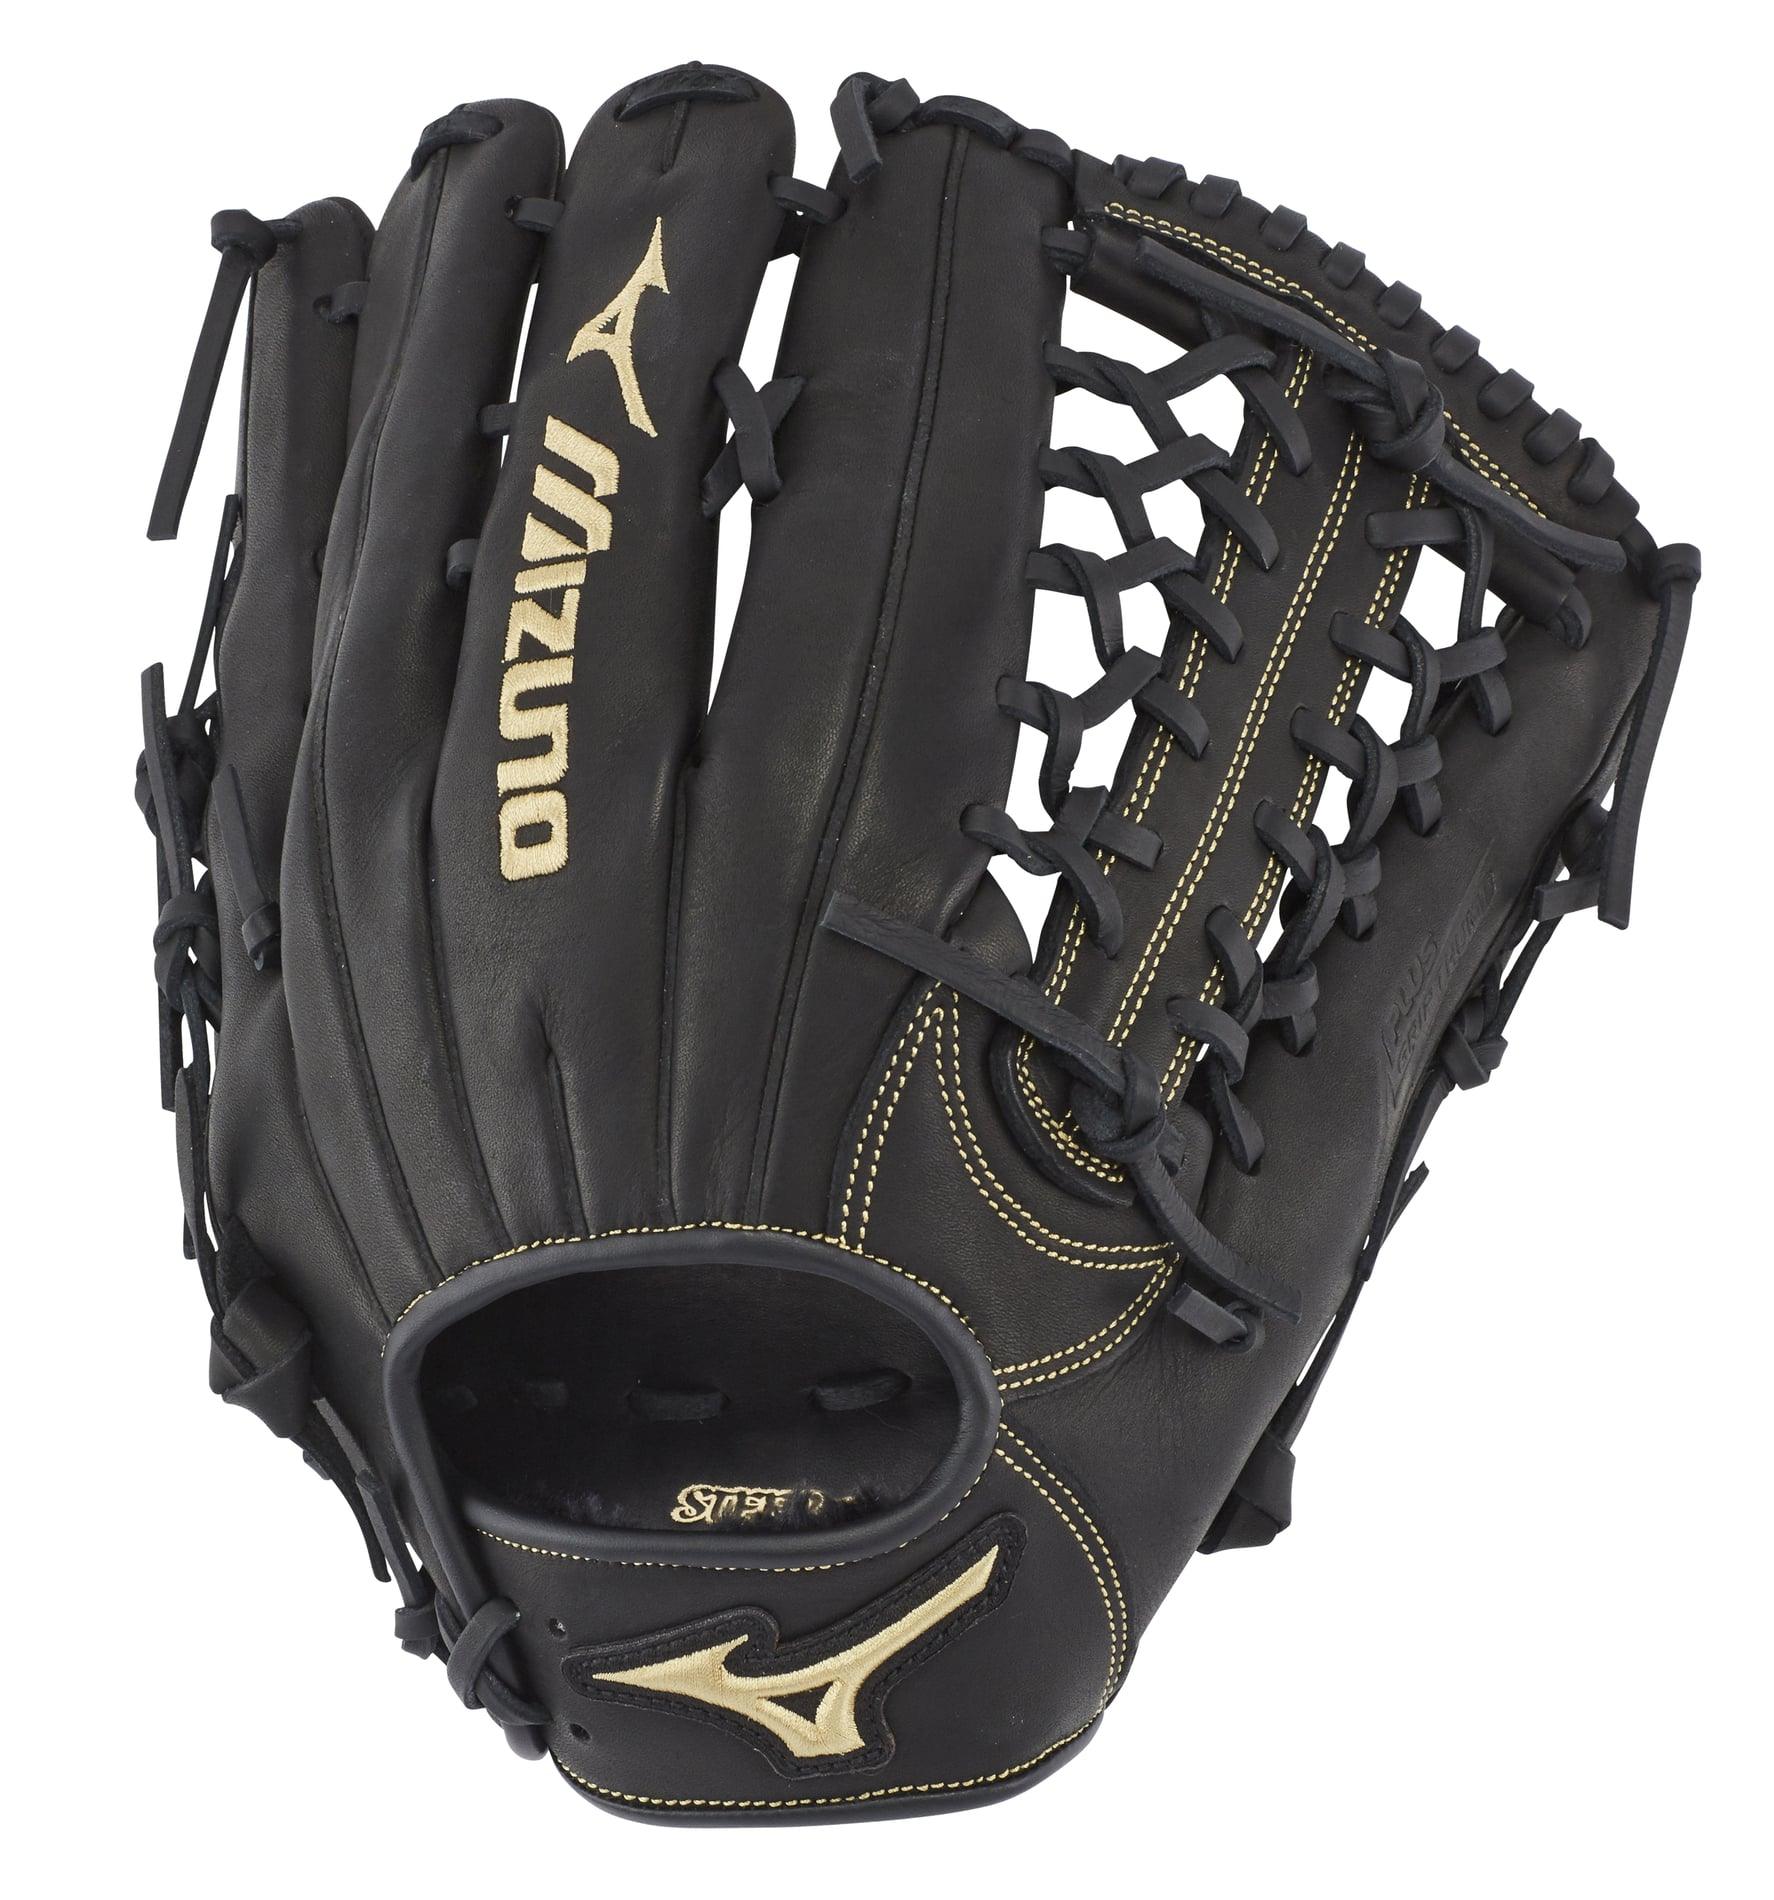 MVP Prime Outfield Baseball Glove 12.75" - Sports Excellence